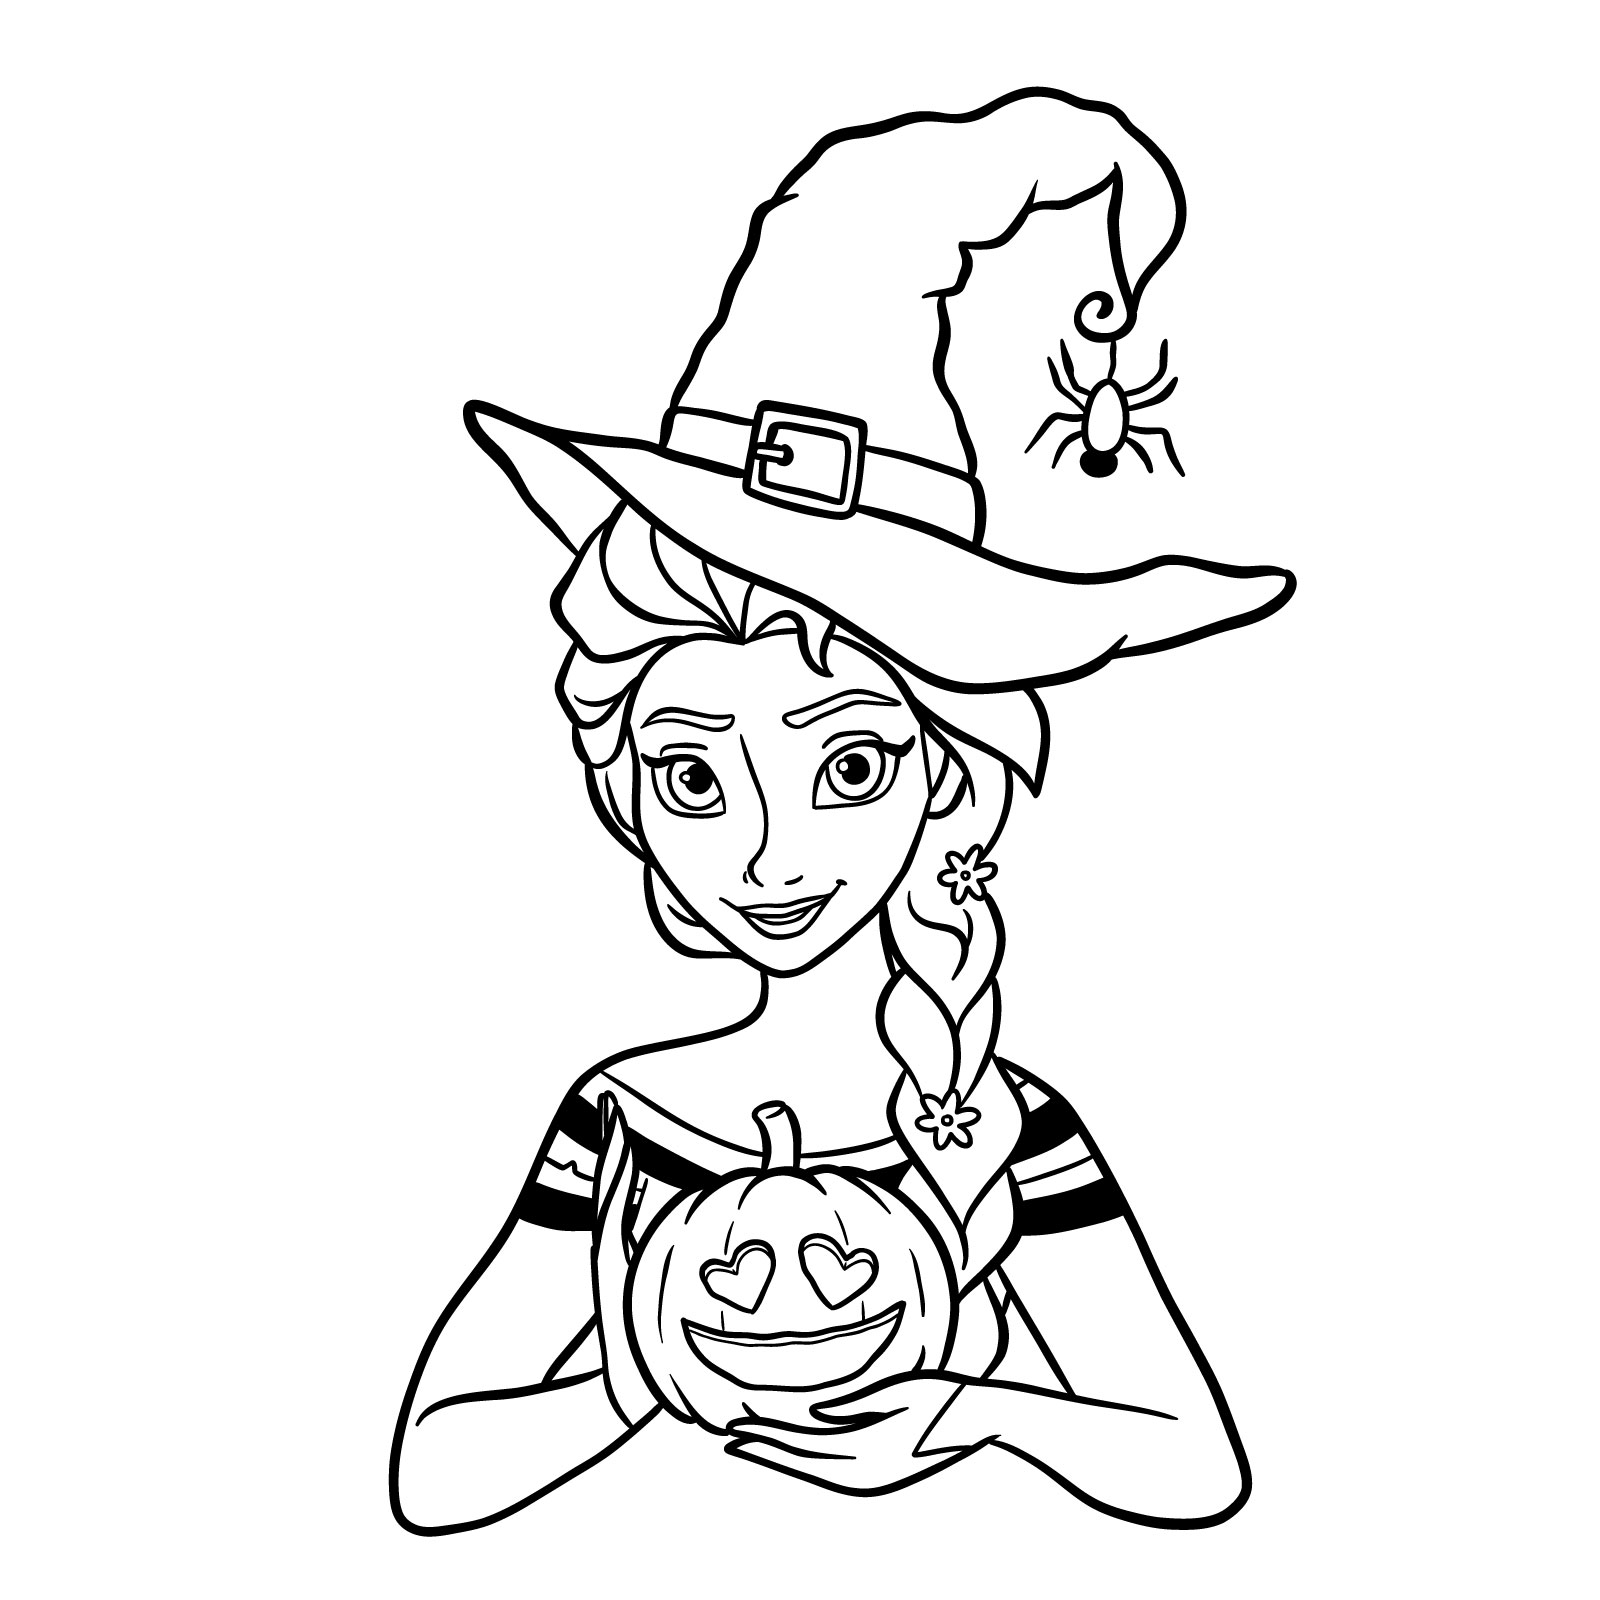 How to Draw Witch Elsa on Halloween - final step